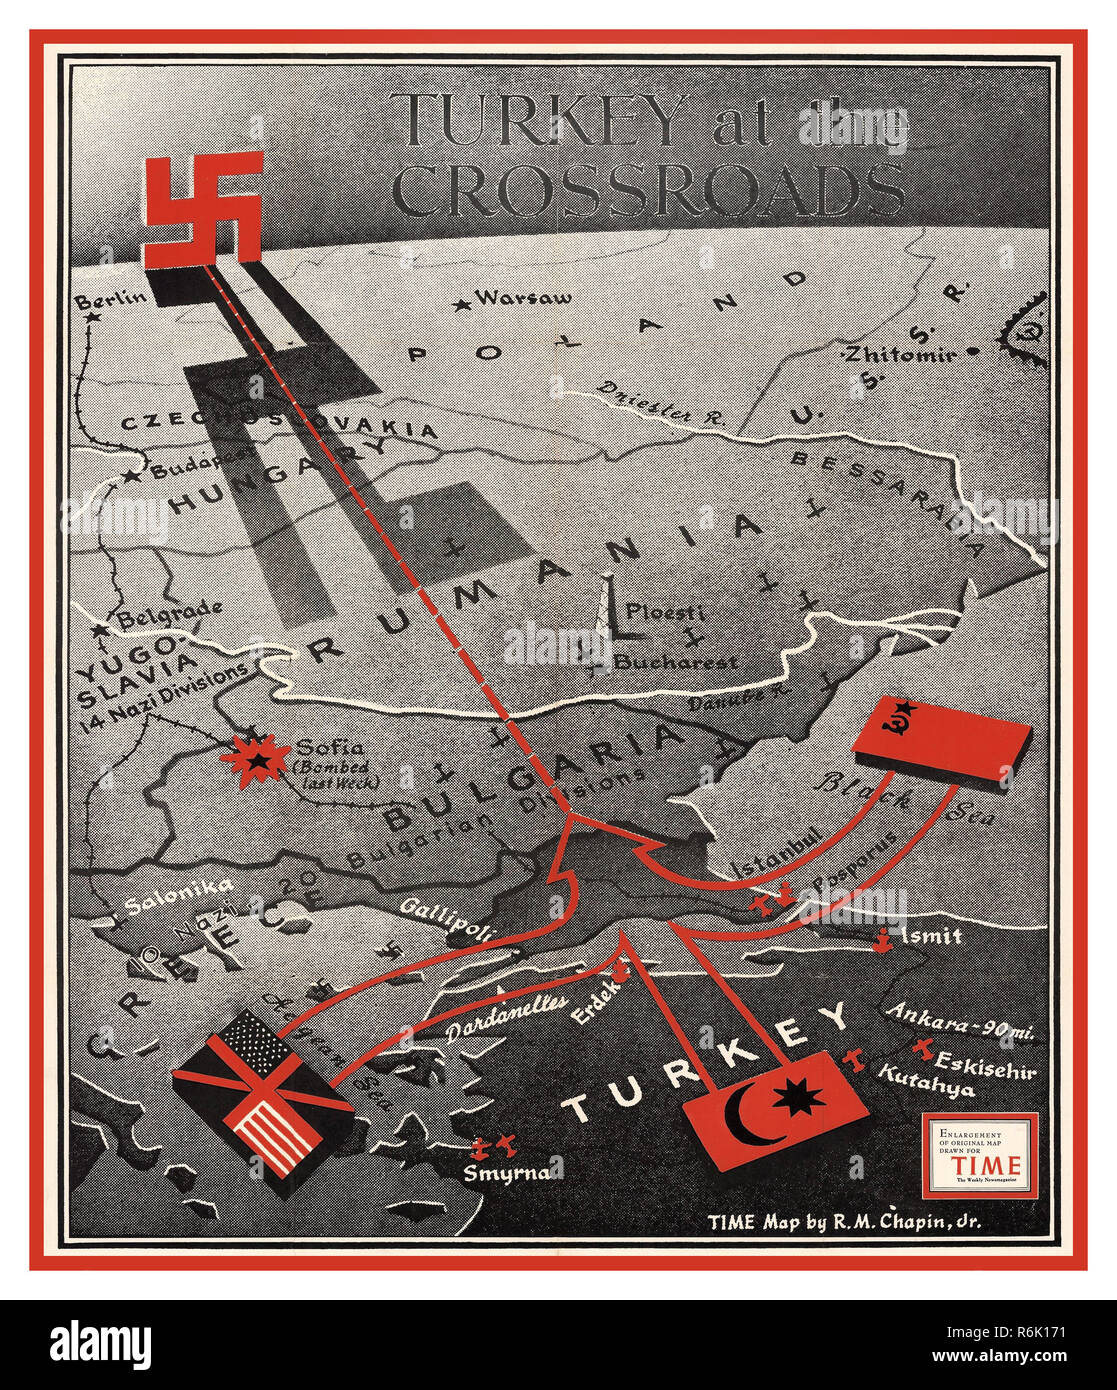 Vintage WW2 1943 press article ‘Turkey at the Crossroads’,with red Swastika casting shadow over Eastern Europe, published in Time Magazine DEC 20th 1943 Turkey remained neutral until the final stages of World War II and tried to maintain an equal distance between both the Axis and the Allies until February 1945, when Turkey entered the war on the side of the Allies against Germany and Japan. Stock Photo